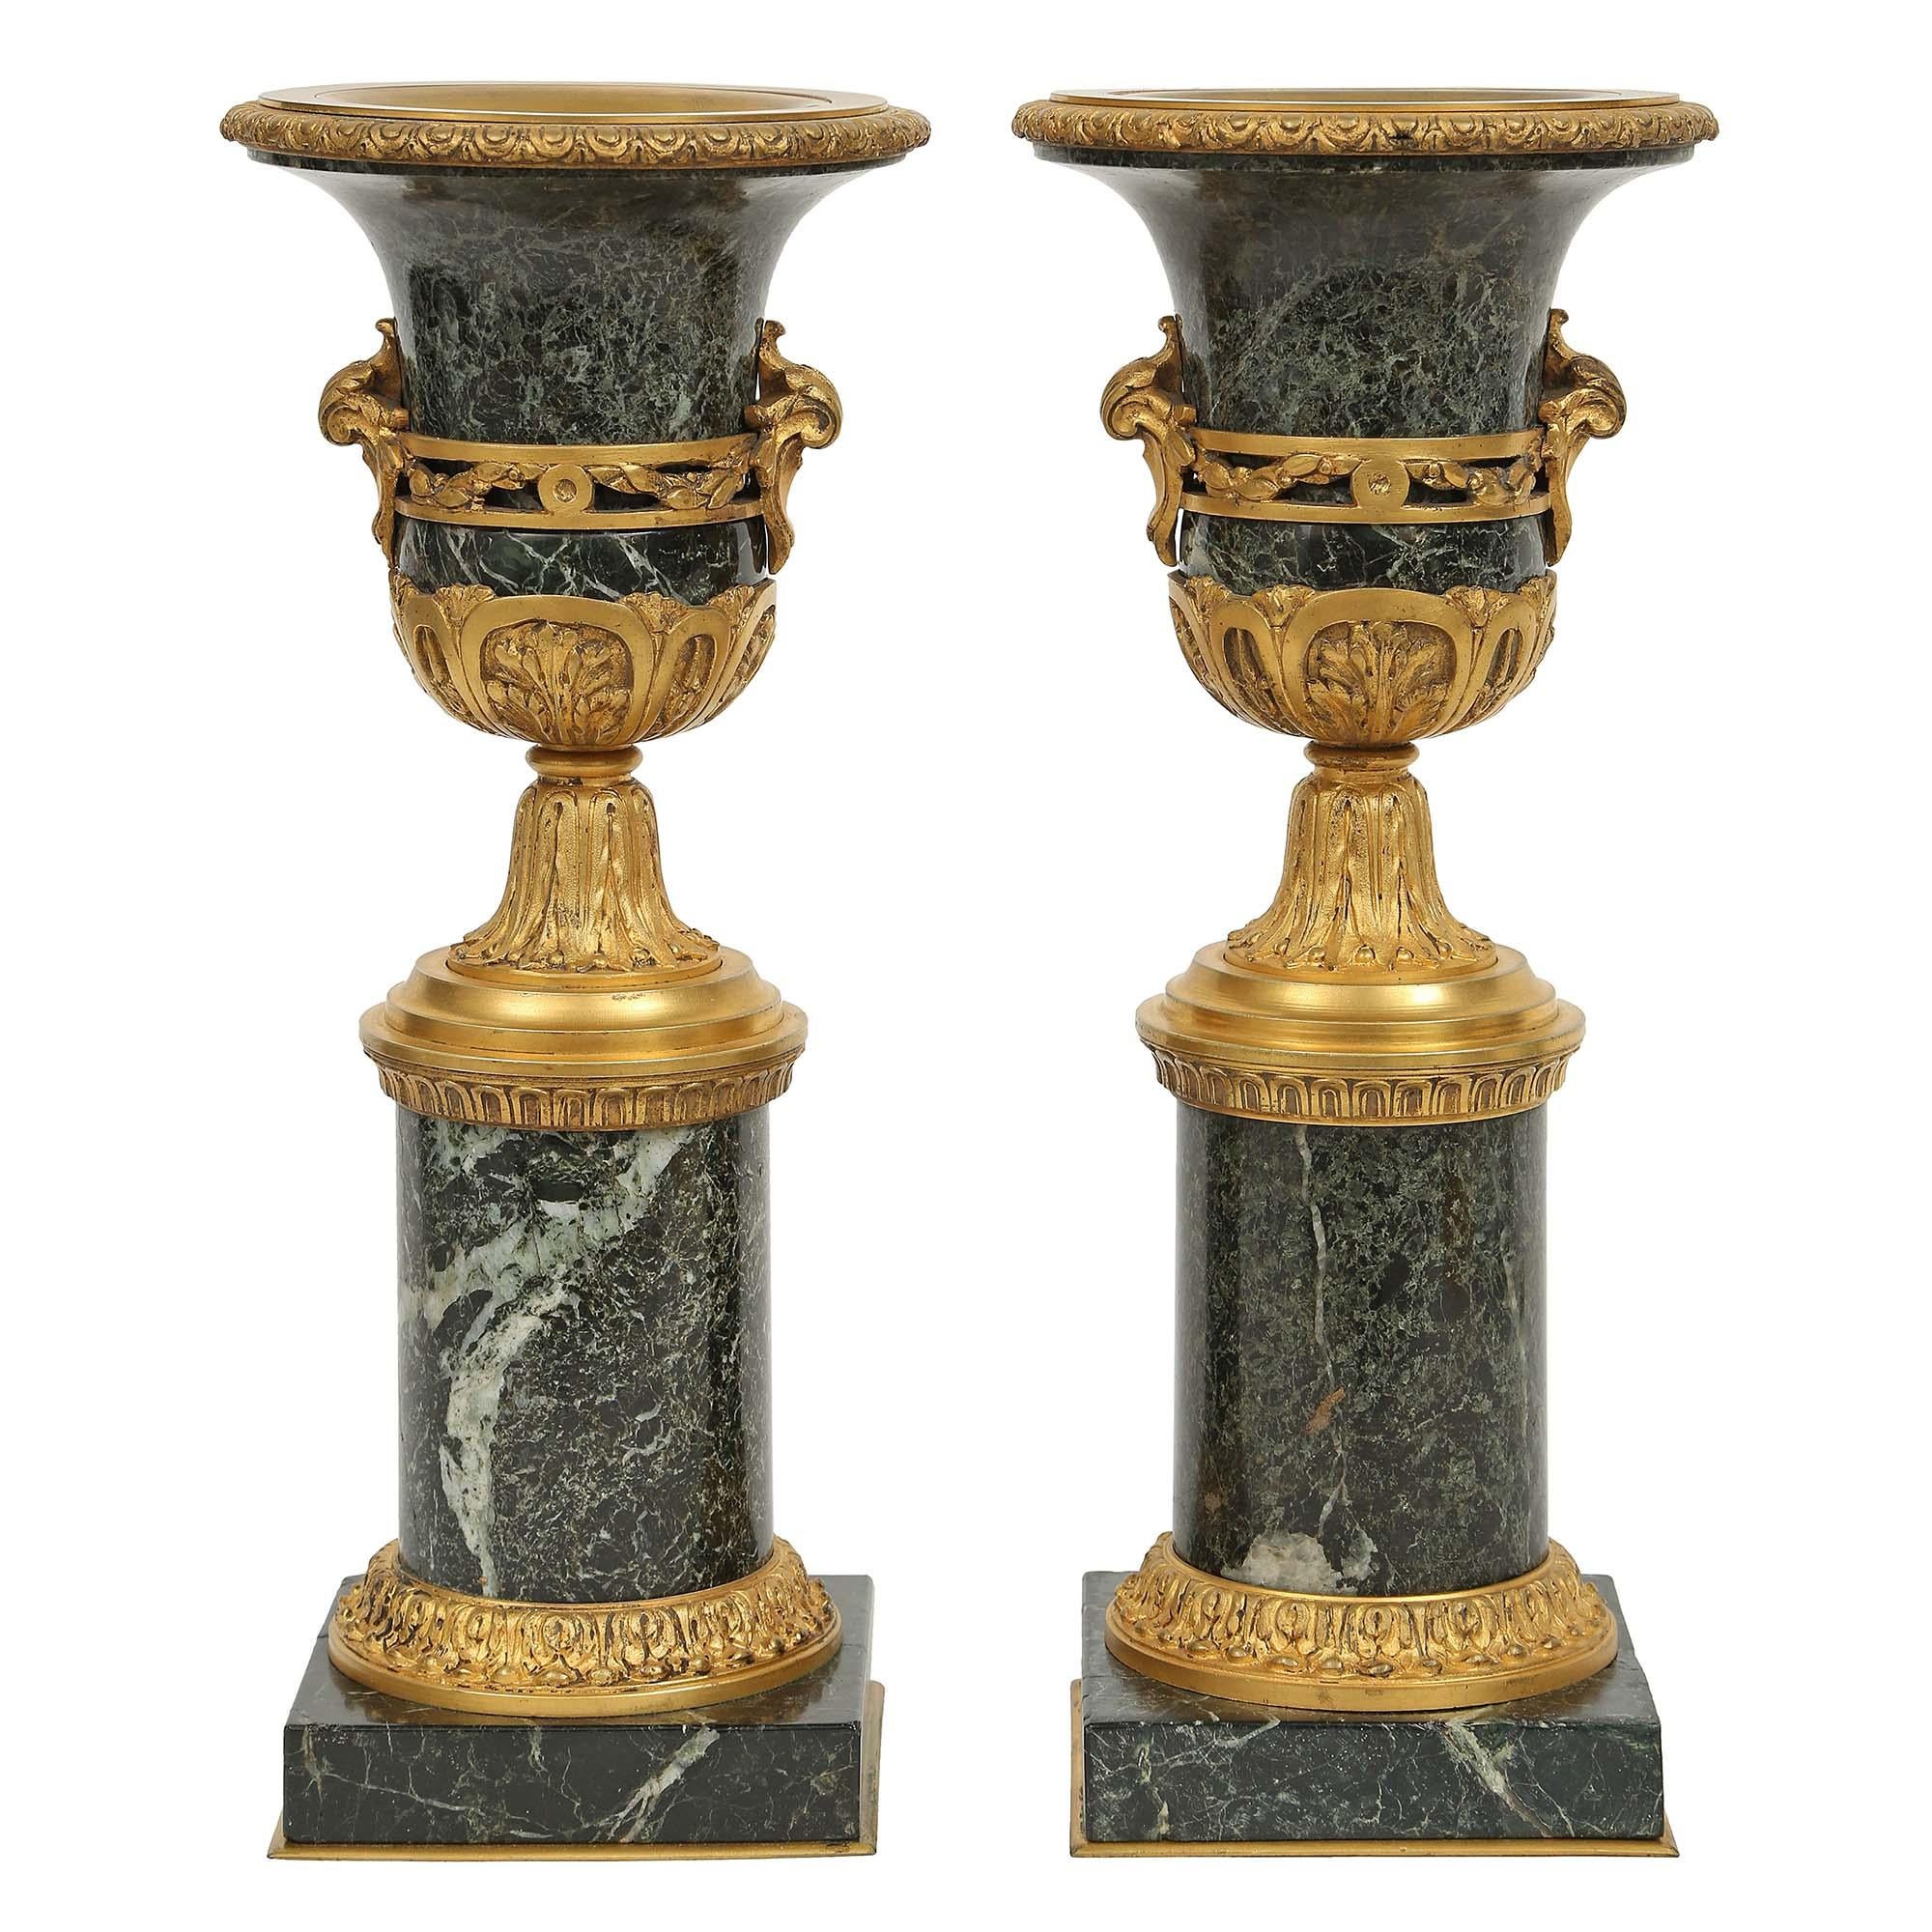 Pair of French Mid-19th Century Louis XVI Style Marble and Ormolu Vases In Good Condition For Sale In West Palm Beach, FL